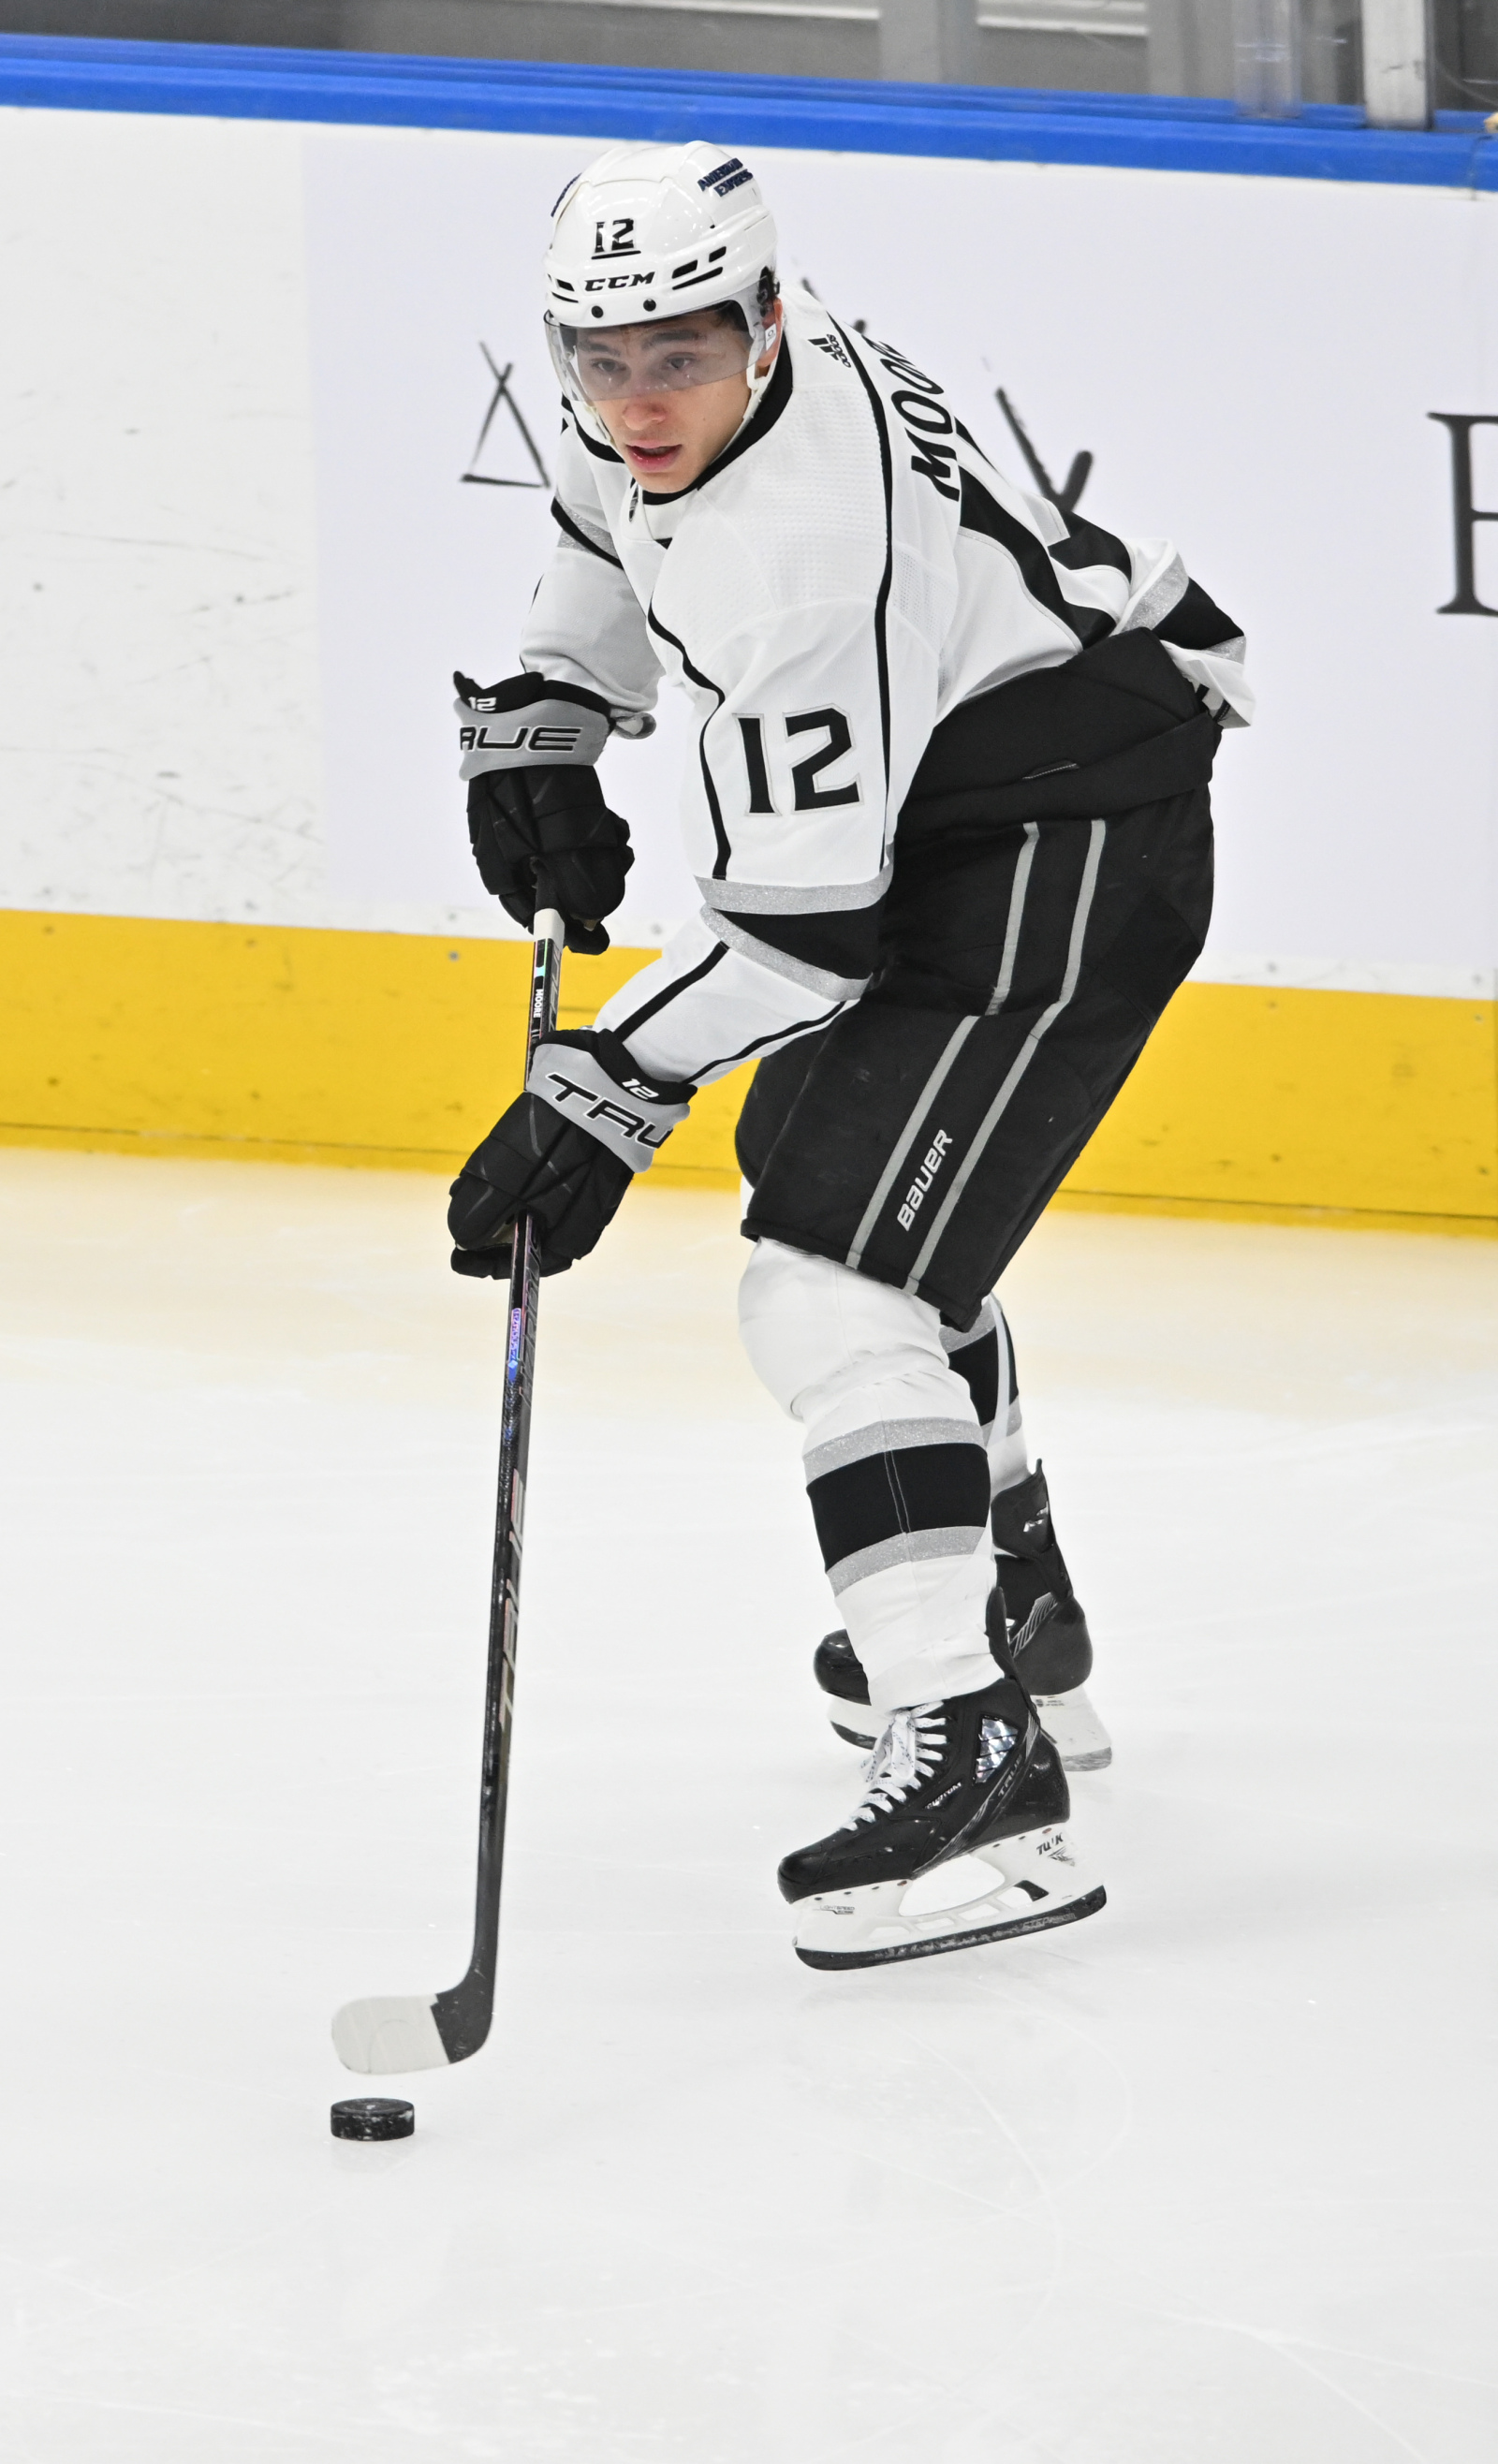 With Jack Campbell out, it's next man up time for LA Kings